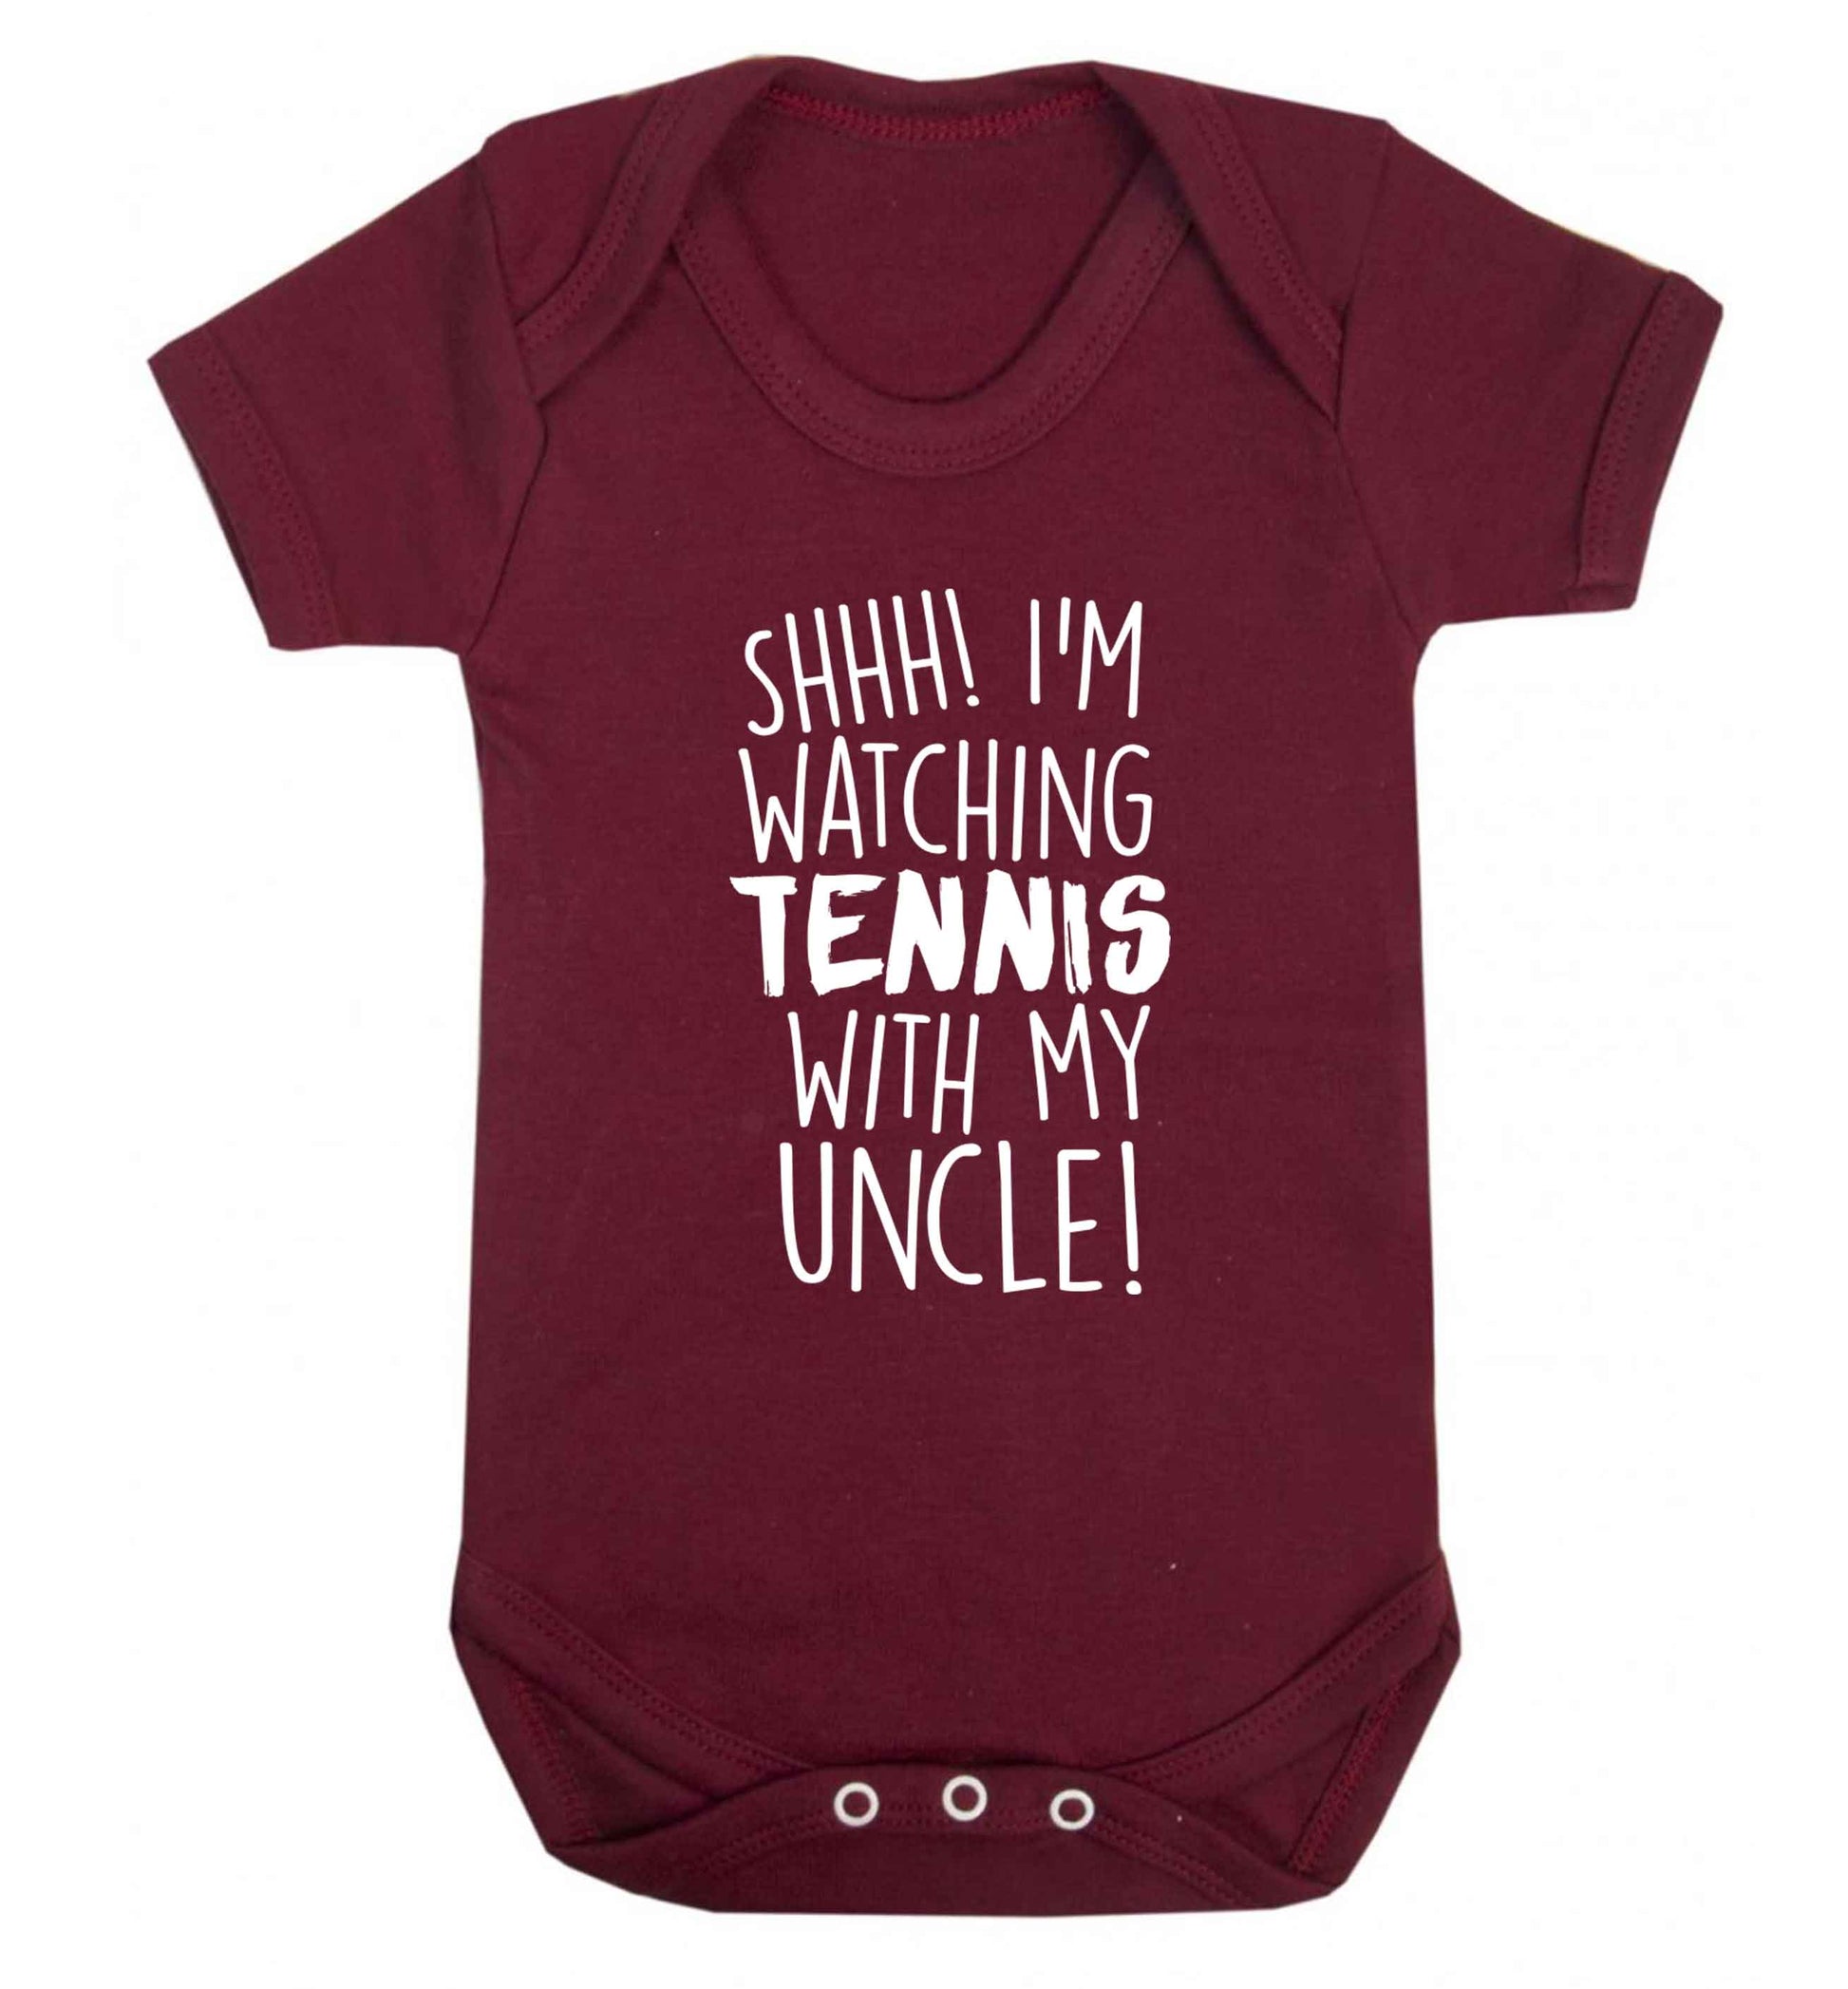 Shh! I'm watching tennis with my uncle! Baby Vest maroon 18-24 months